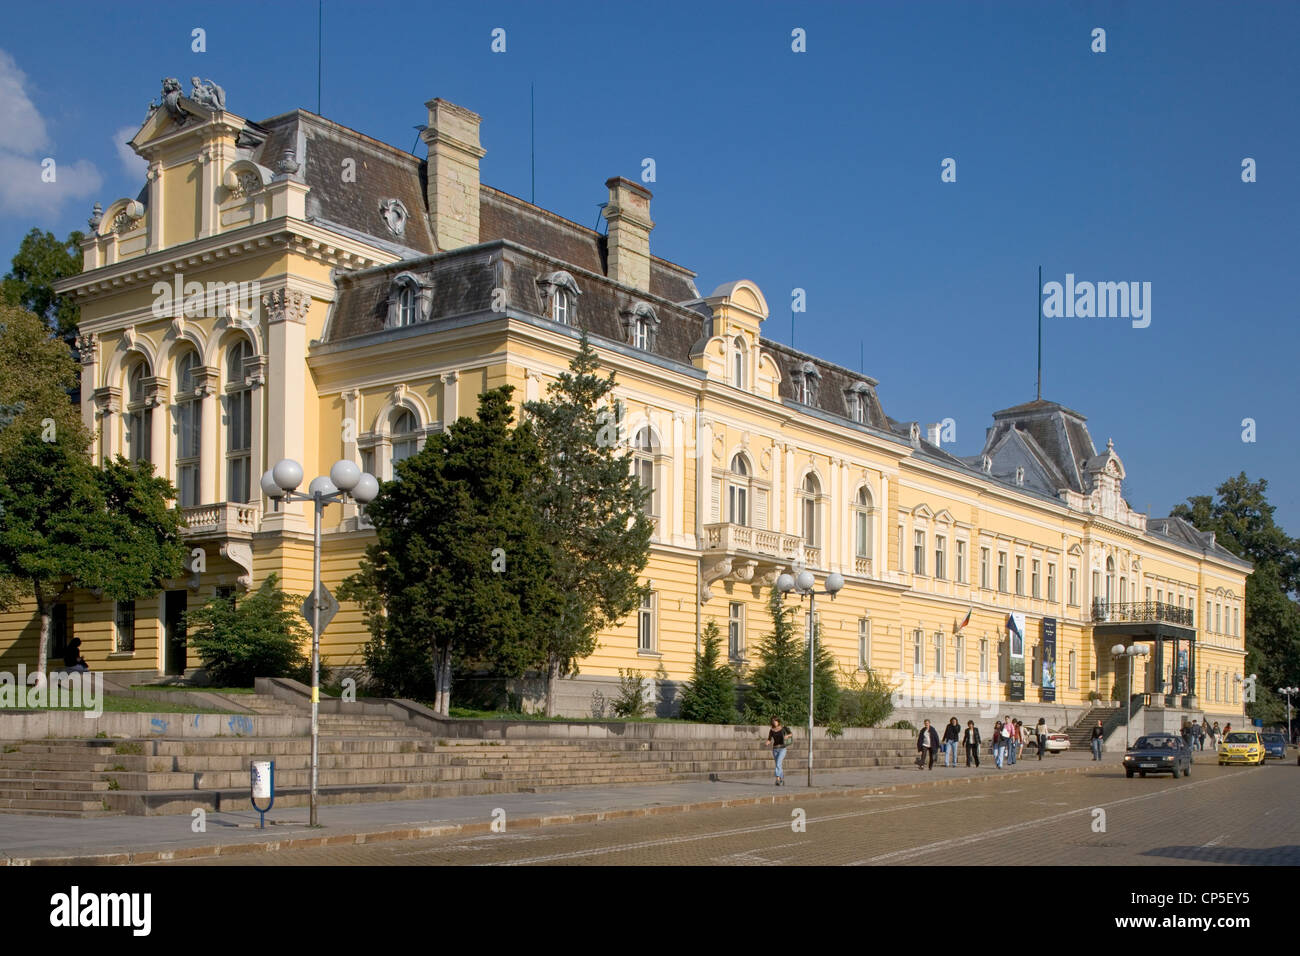 Bulgaria - Sofia. The seat of the Ethnographic Museum (Etnografski muzej) and the Art Museum, formerly the Royal Palace Stock Photo